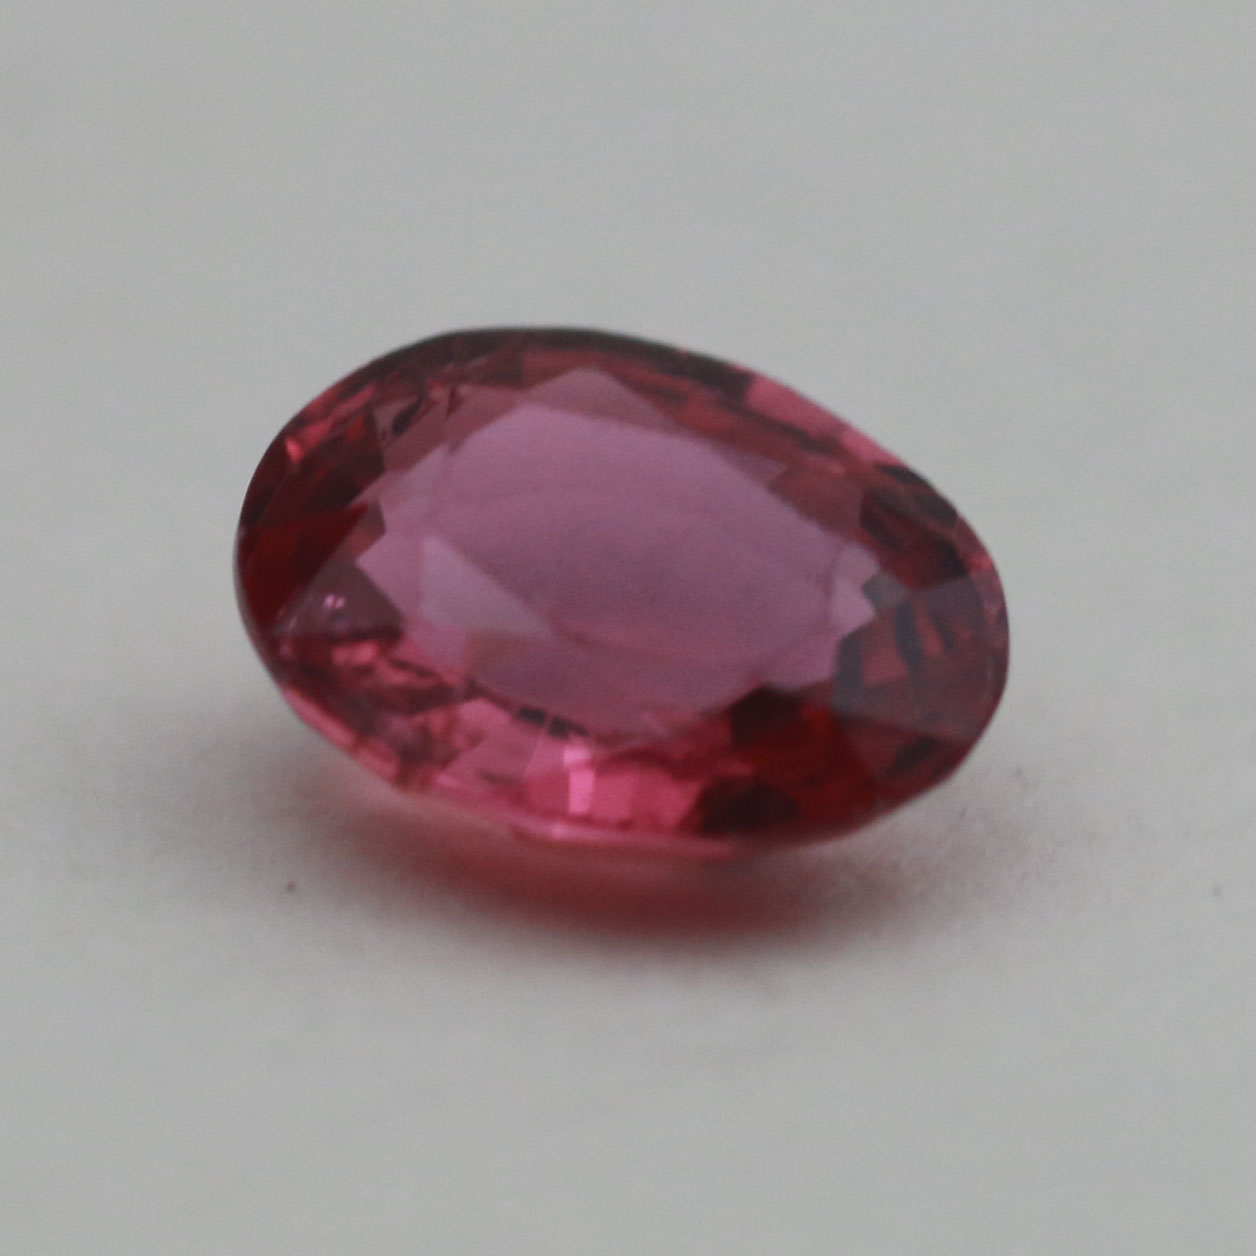 PINK SAPPHIRE 5.6X4.4 OVAL 0.6CT